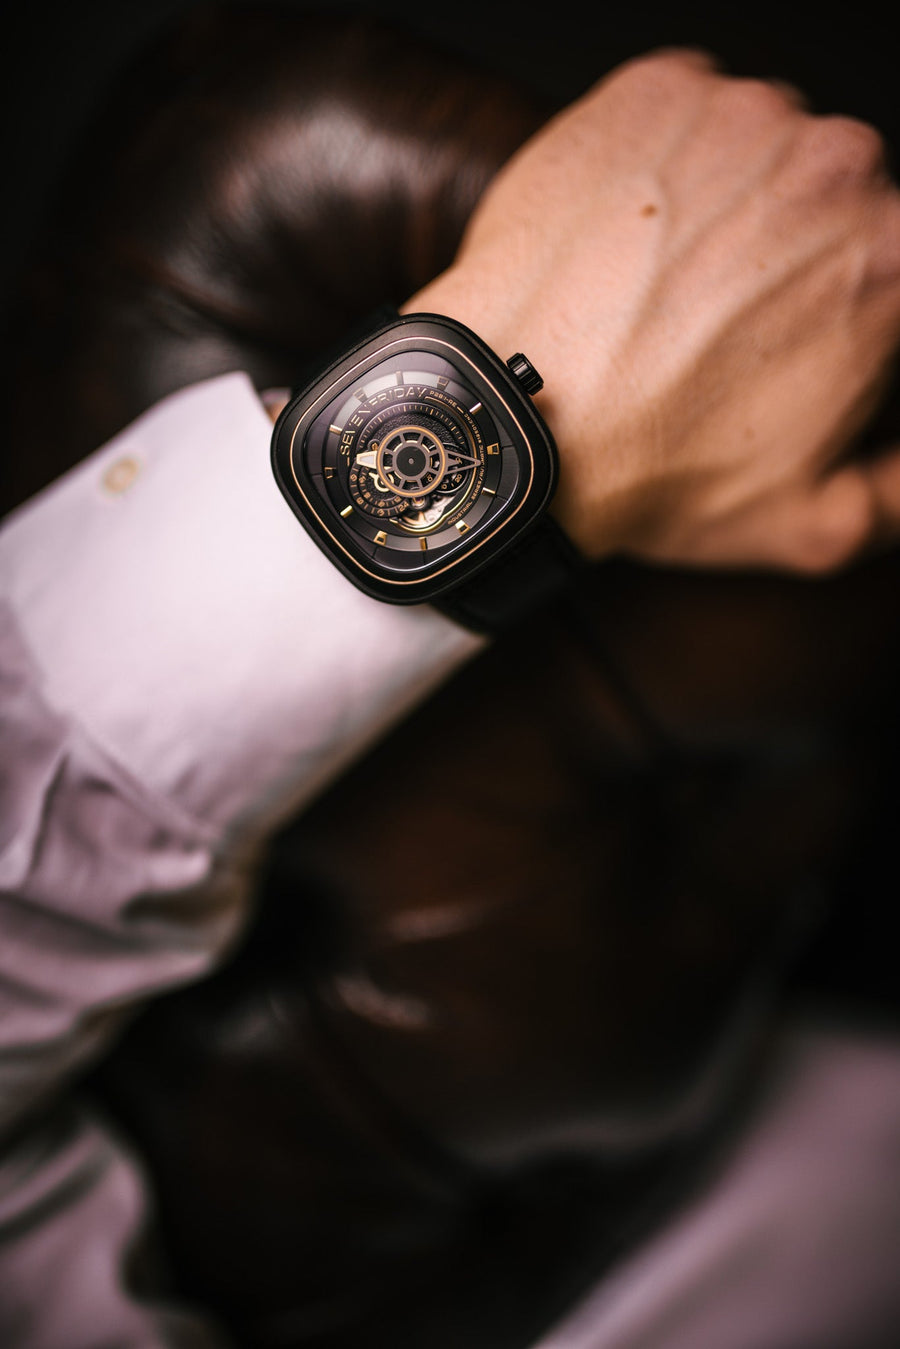 SEVENFRIDAY P2B/02 : WORKS - The Independent CollectiveSEVENFRIDAY P2B/02 - The Independent Collective Watches